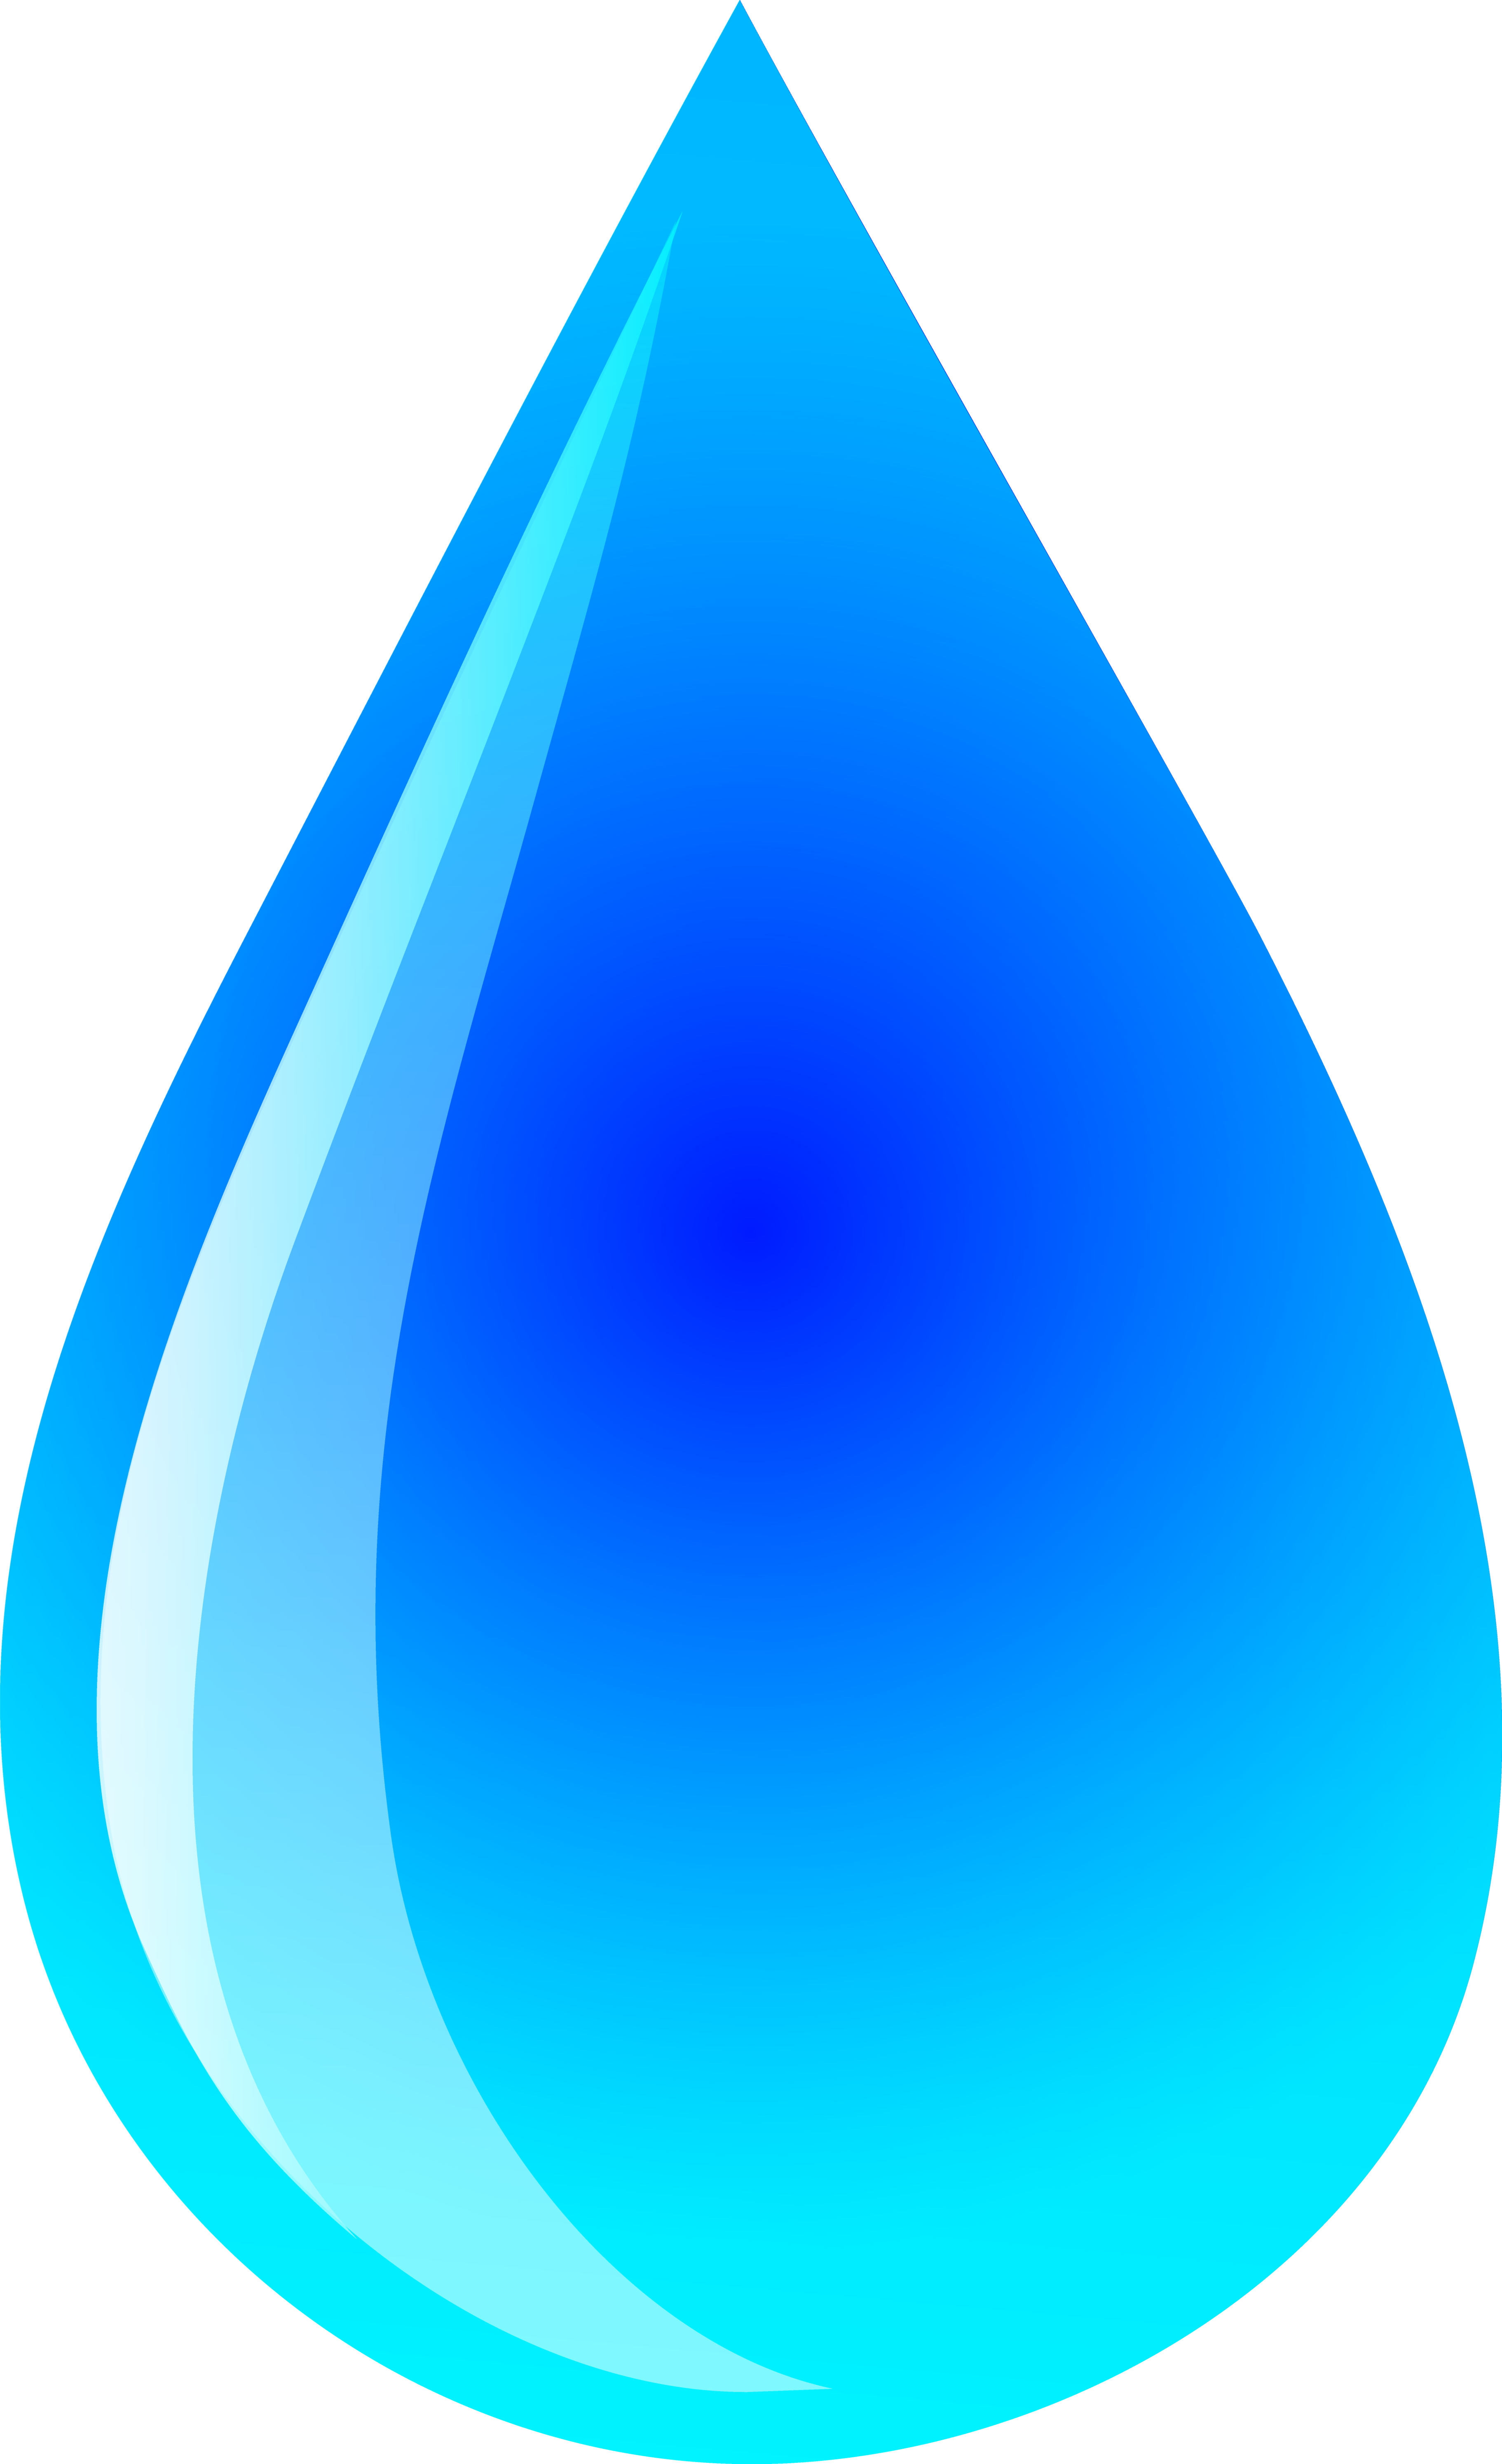 Drops of water clipart